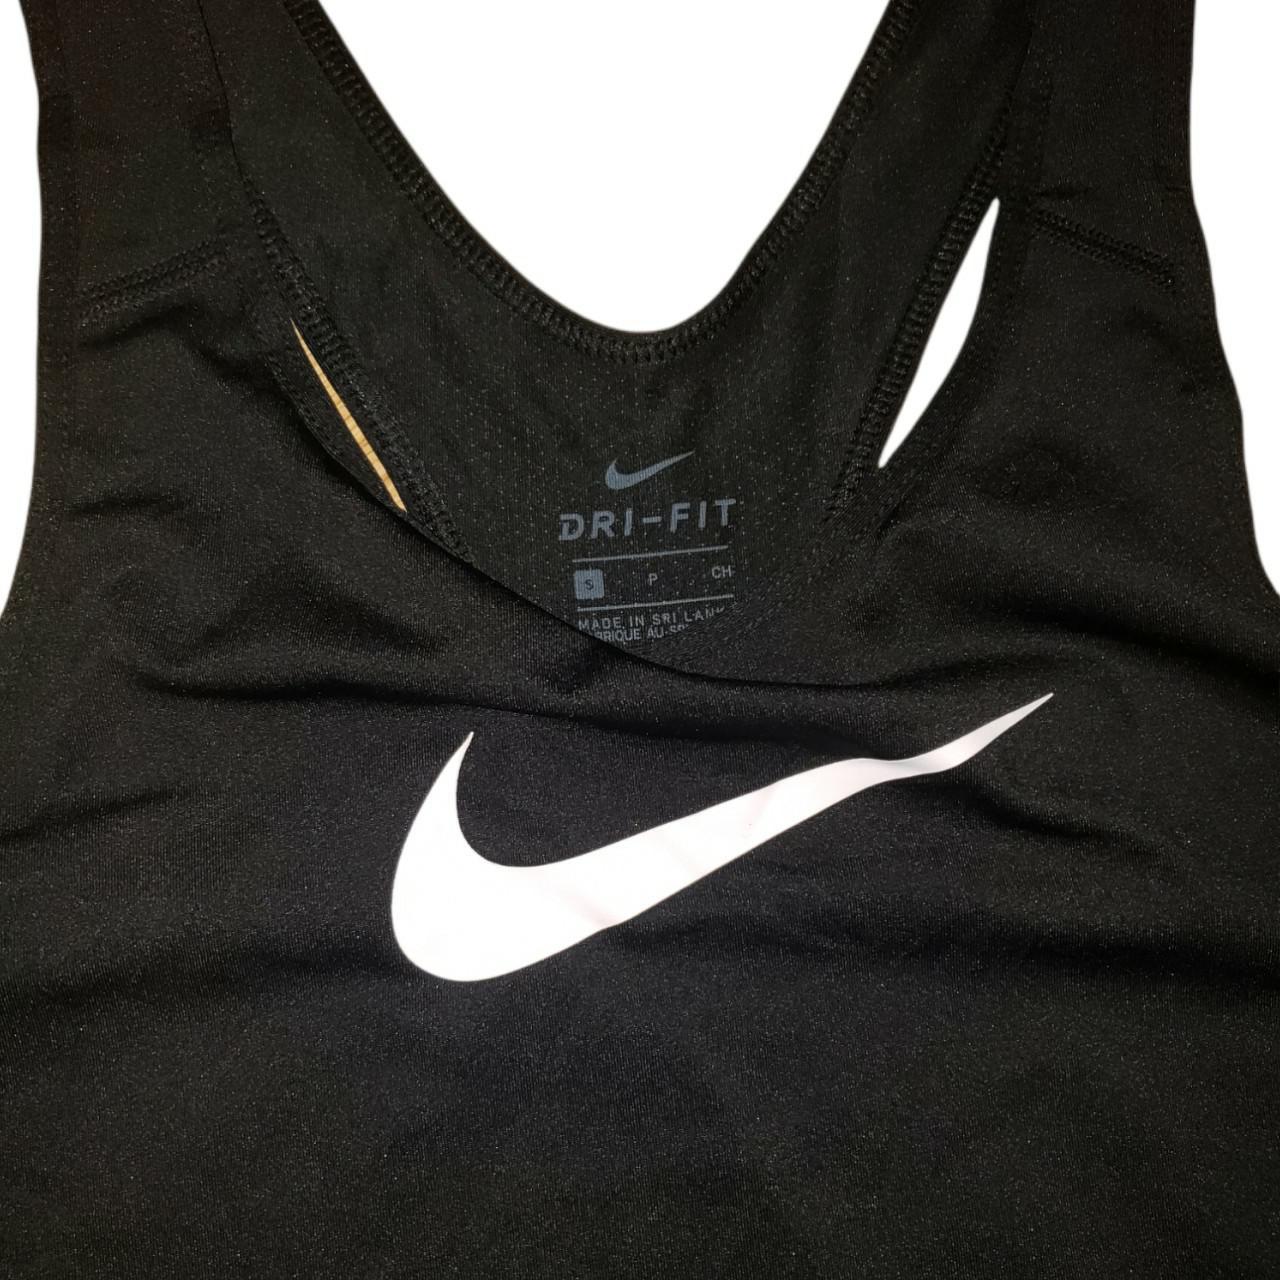 Product Image 2 - Nike Dri-Fit Tank Top.
Size Small,